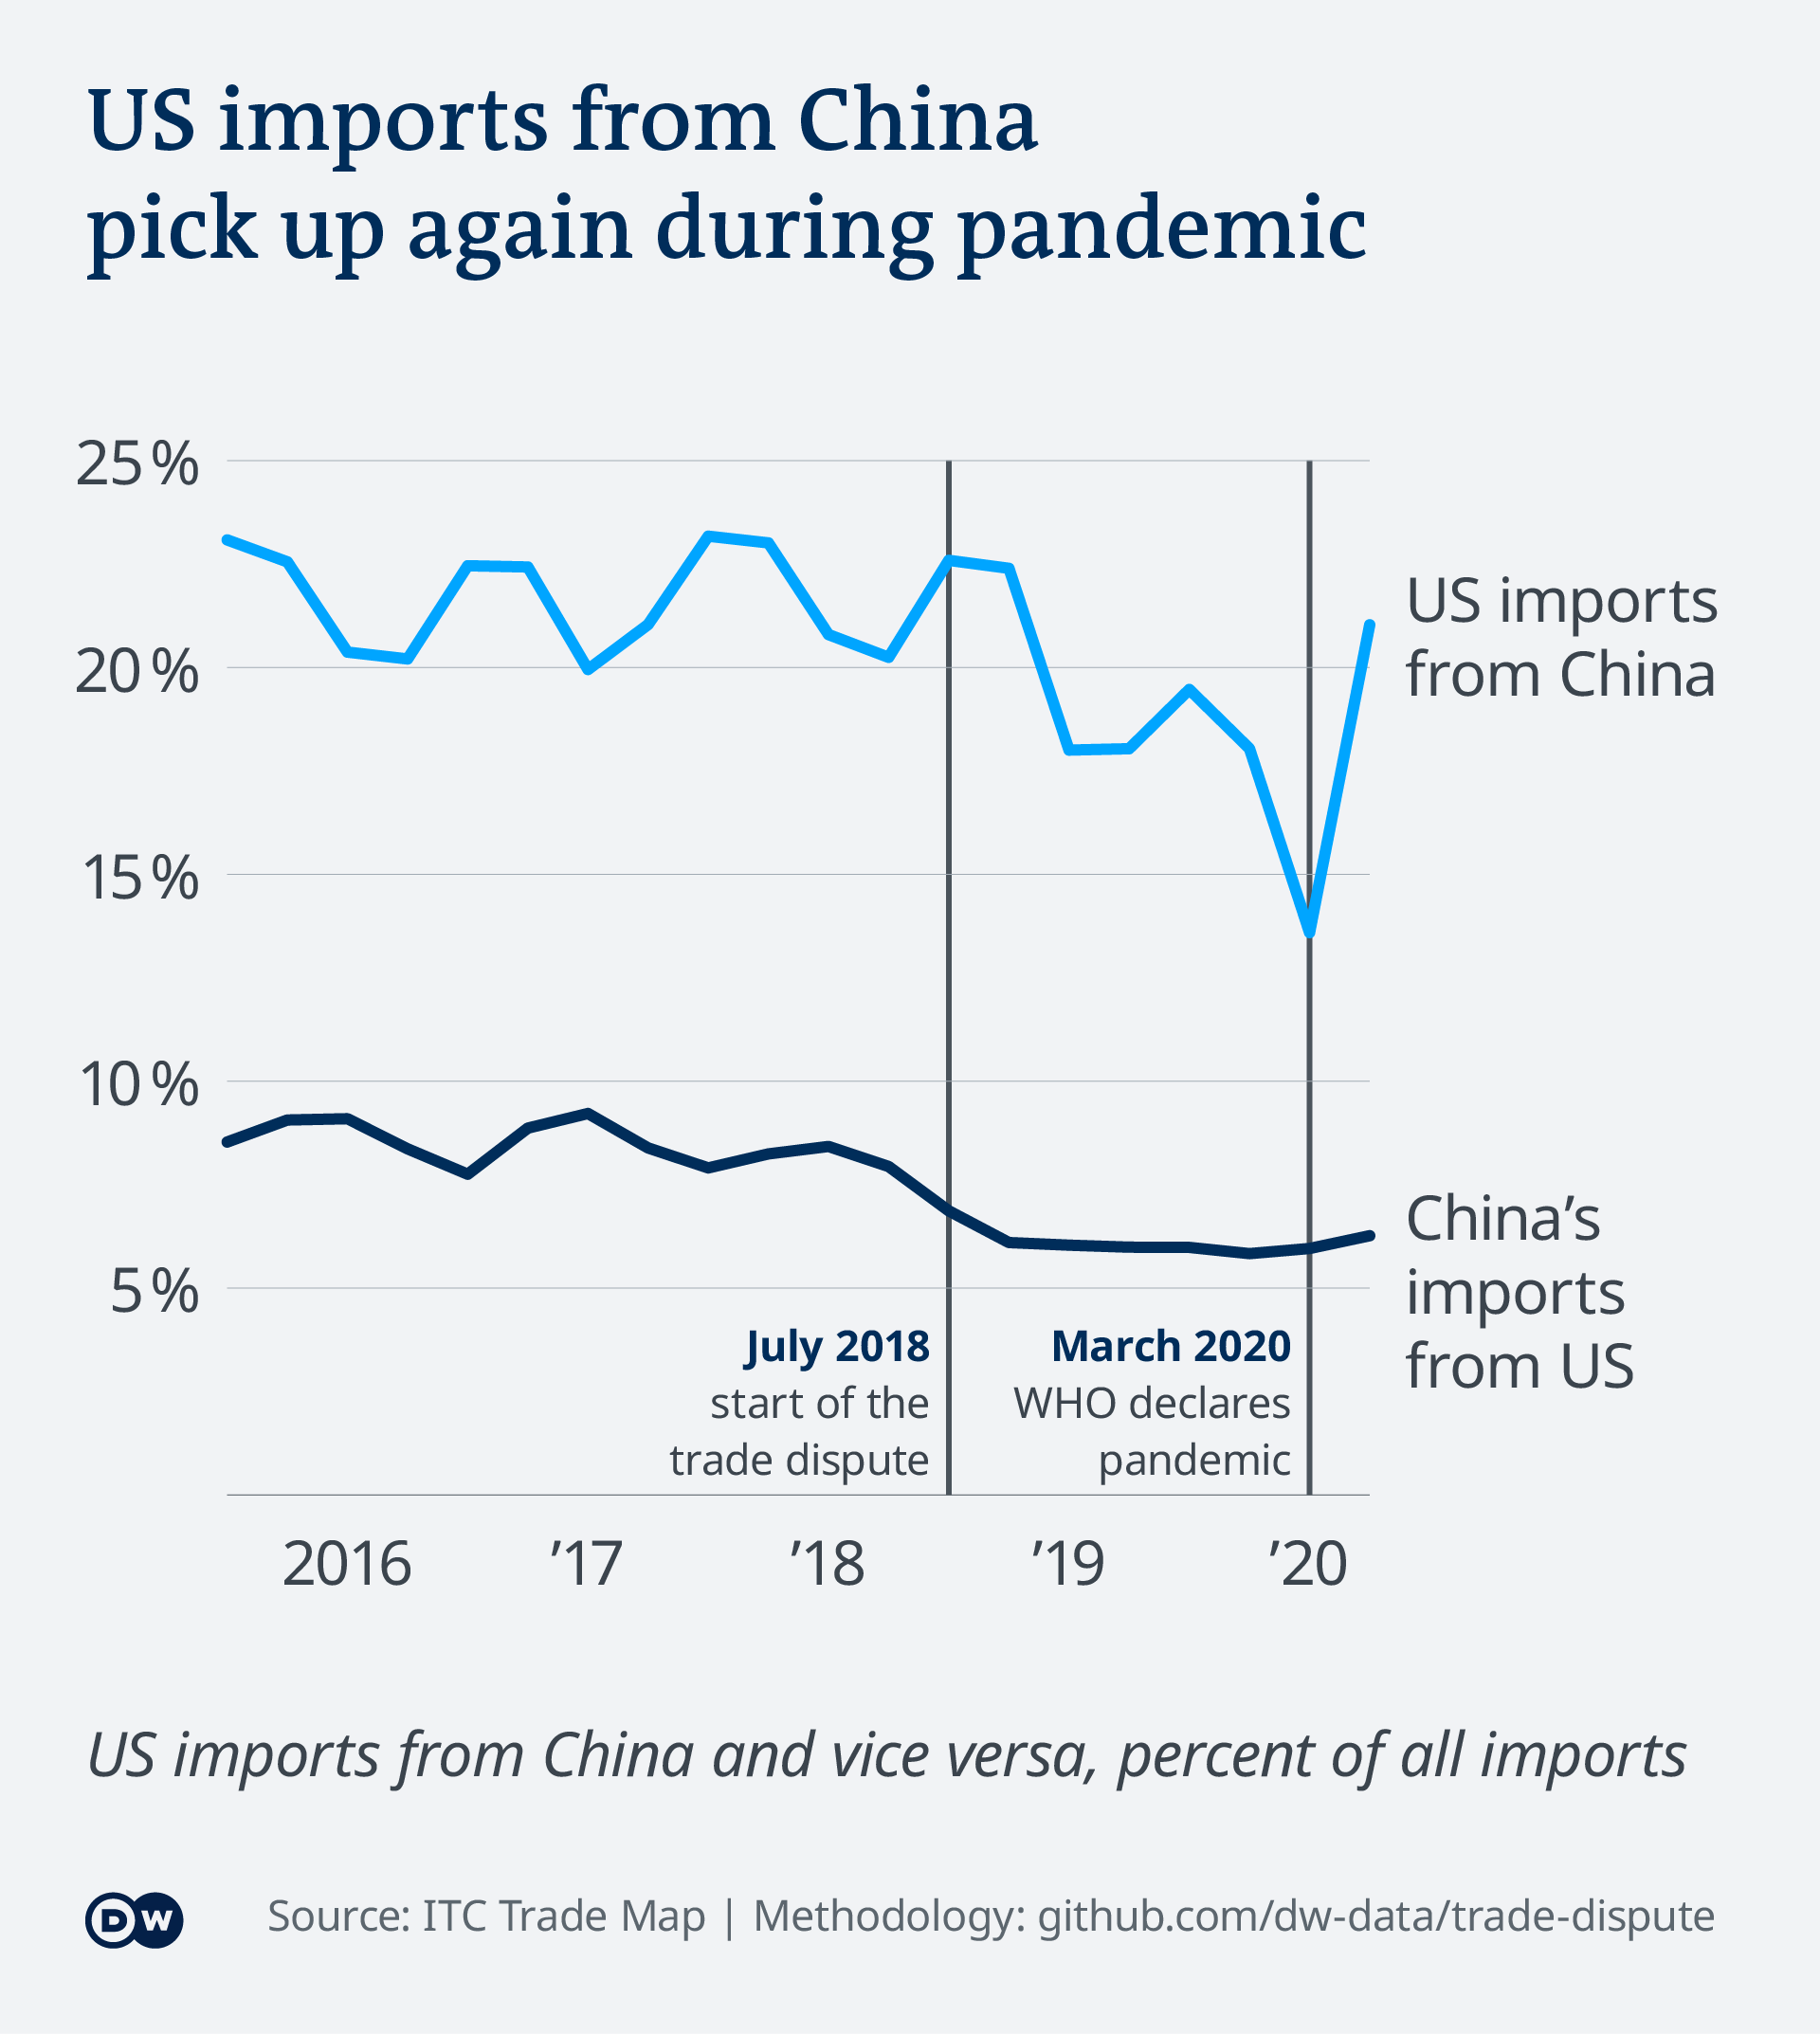 Data visualization Trade Dispute US China - imports over time during the pandemic